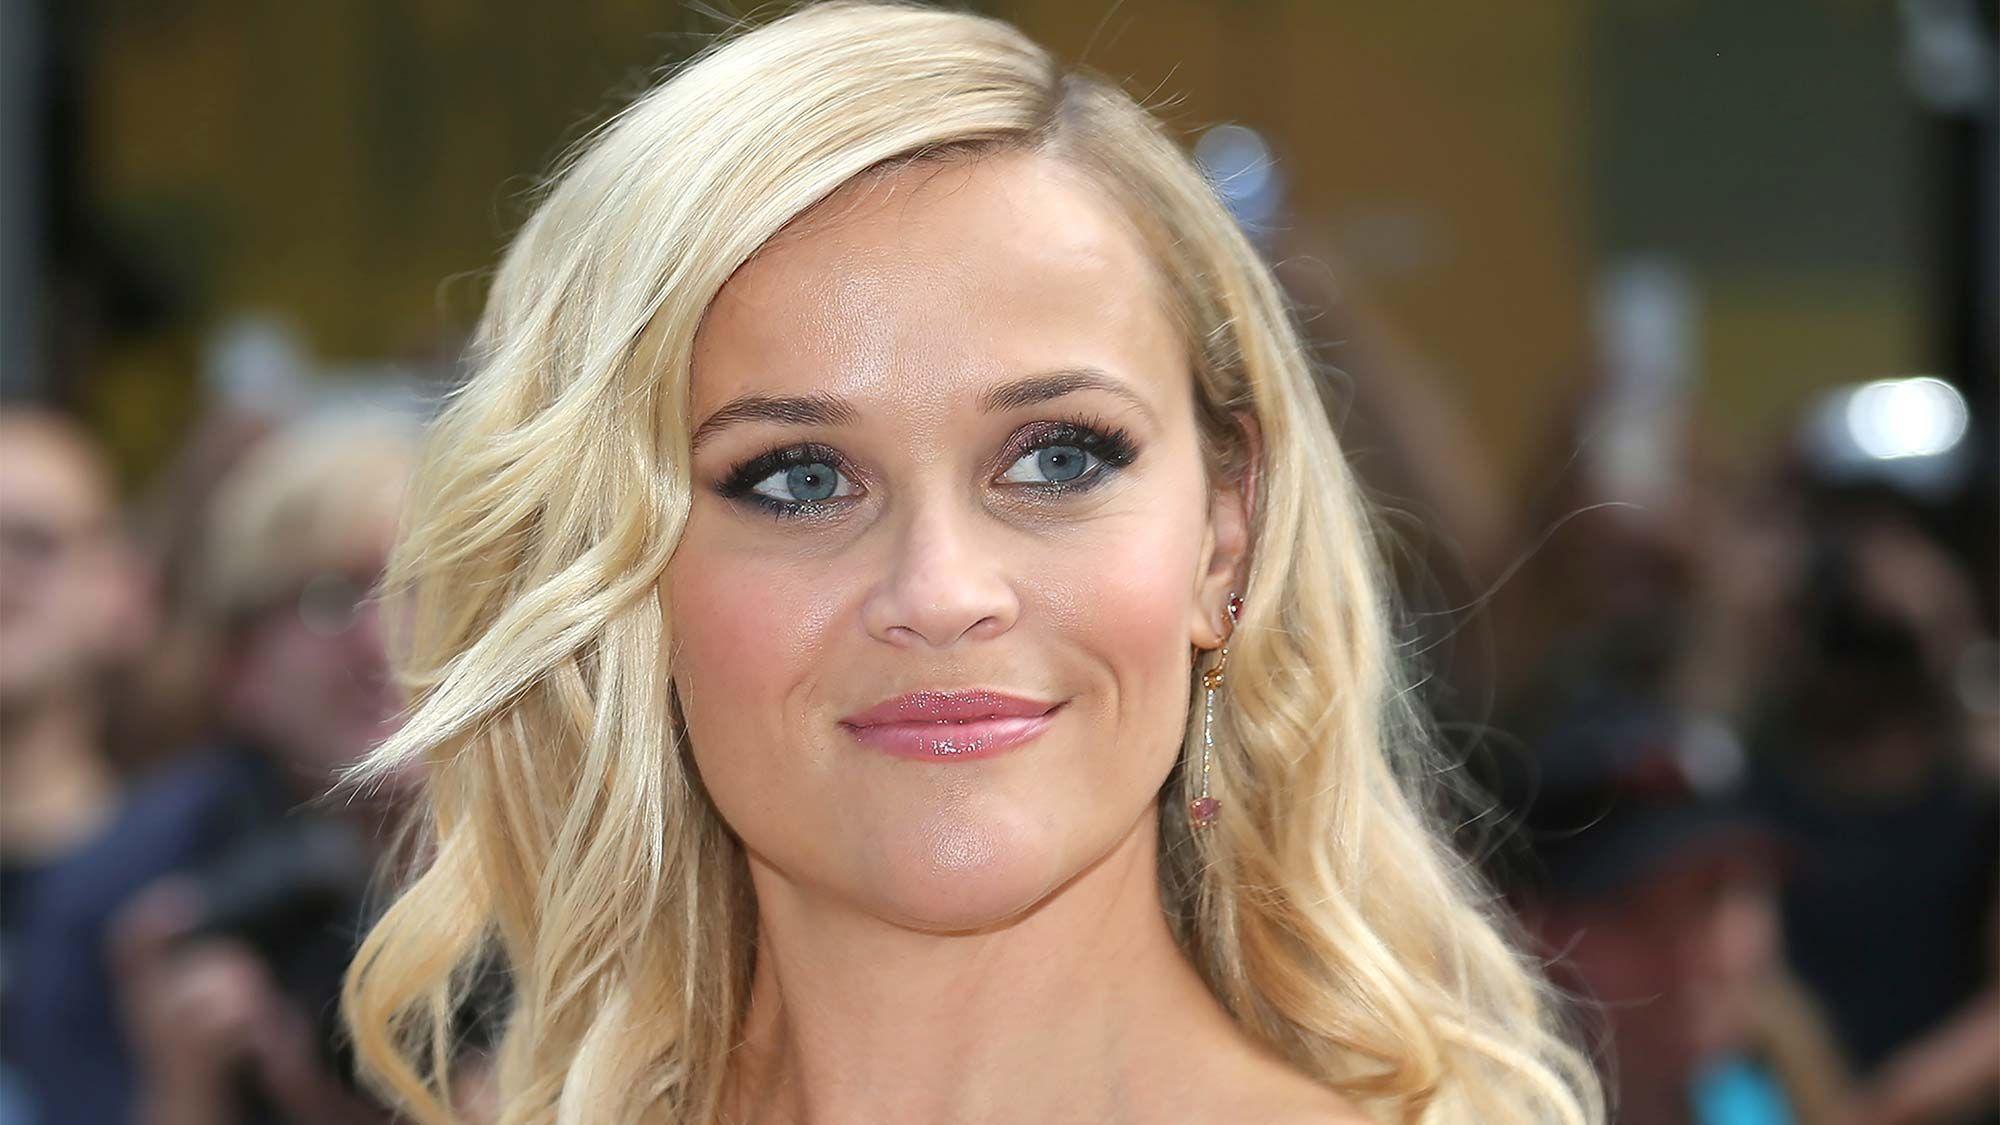 Reese Witherspoon Wallpaper Image Photo Picture Background